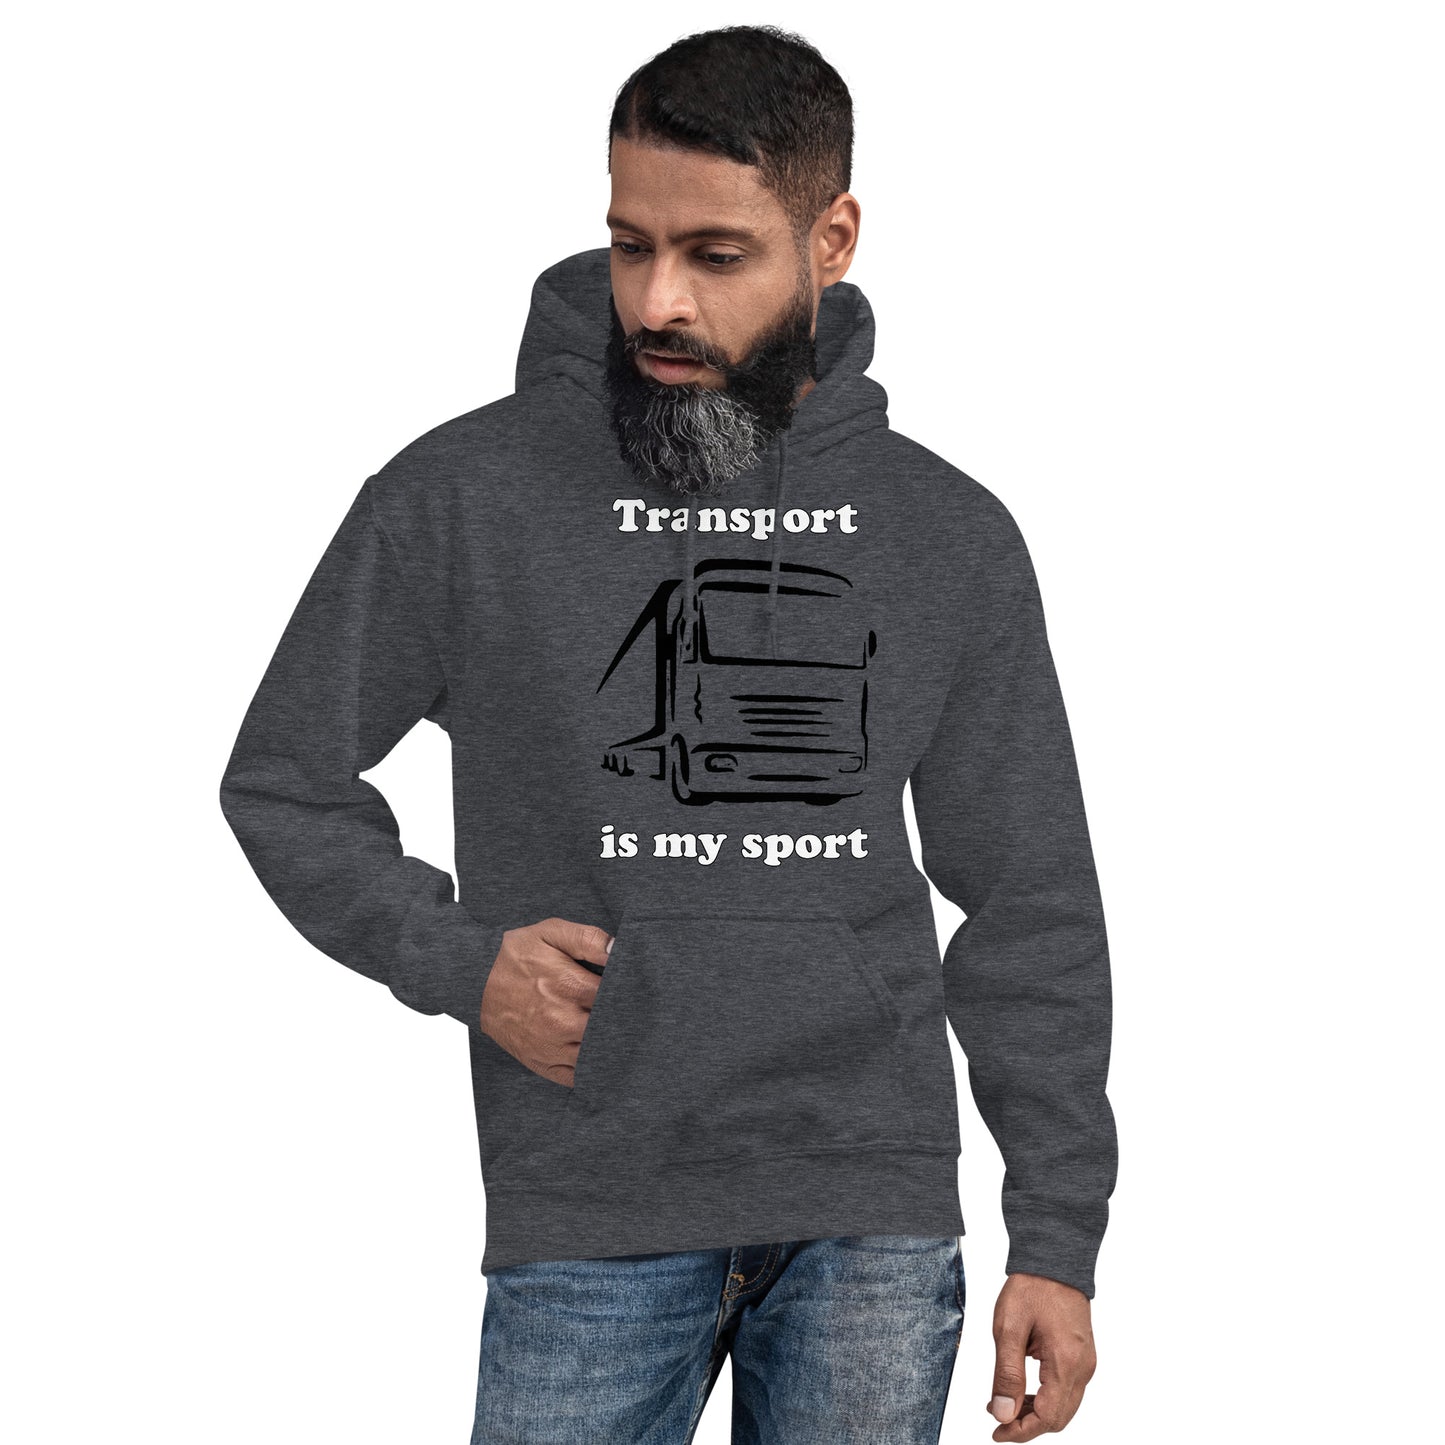 Man with dark grey hoodie with picture of truck and text "Transport is my sport"